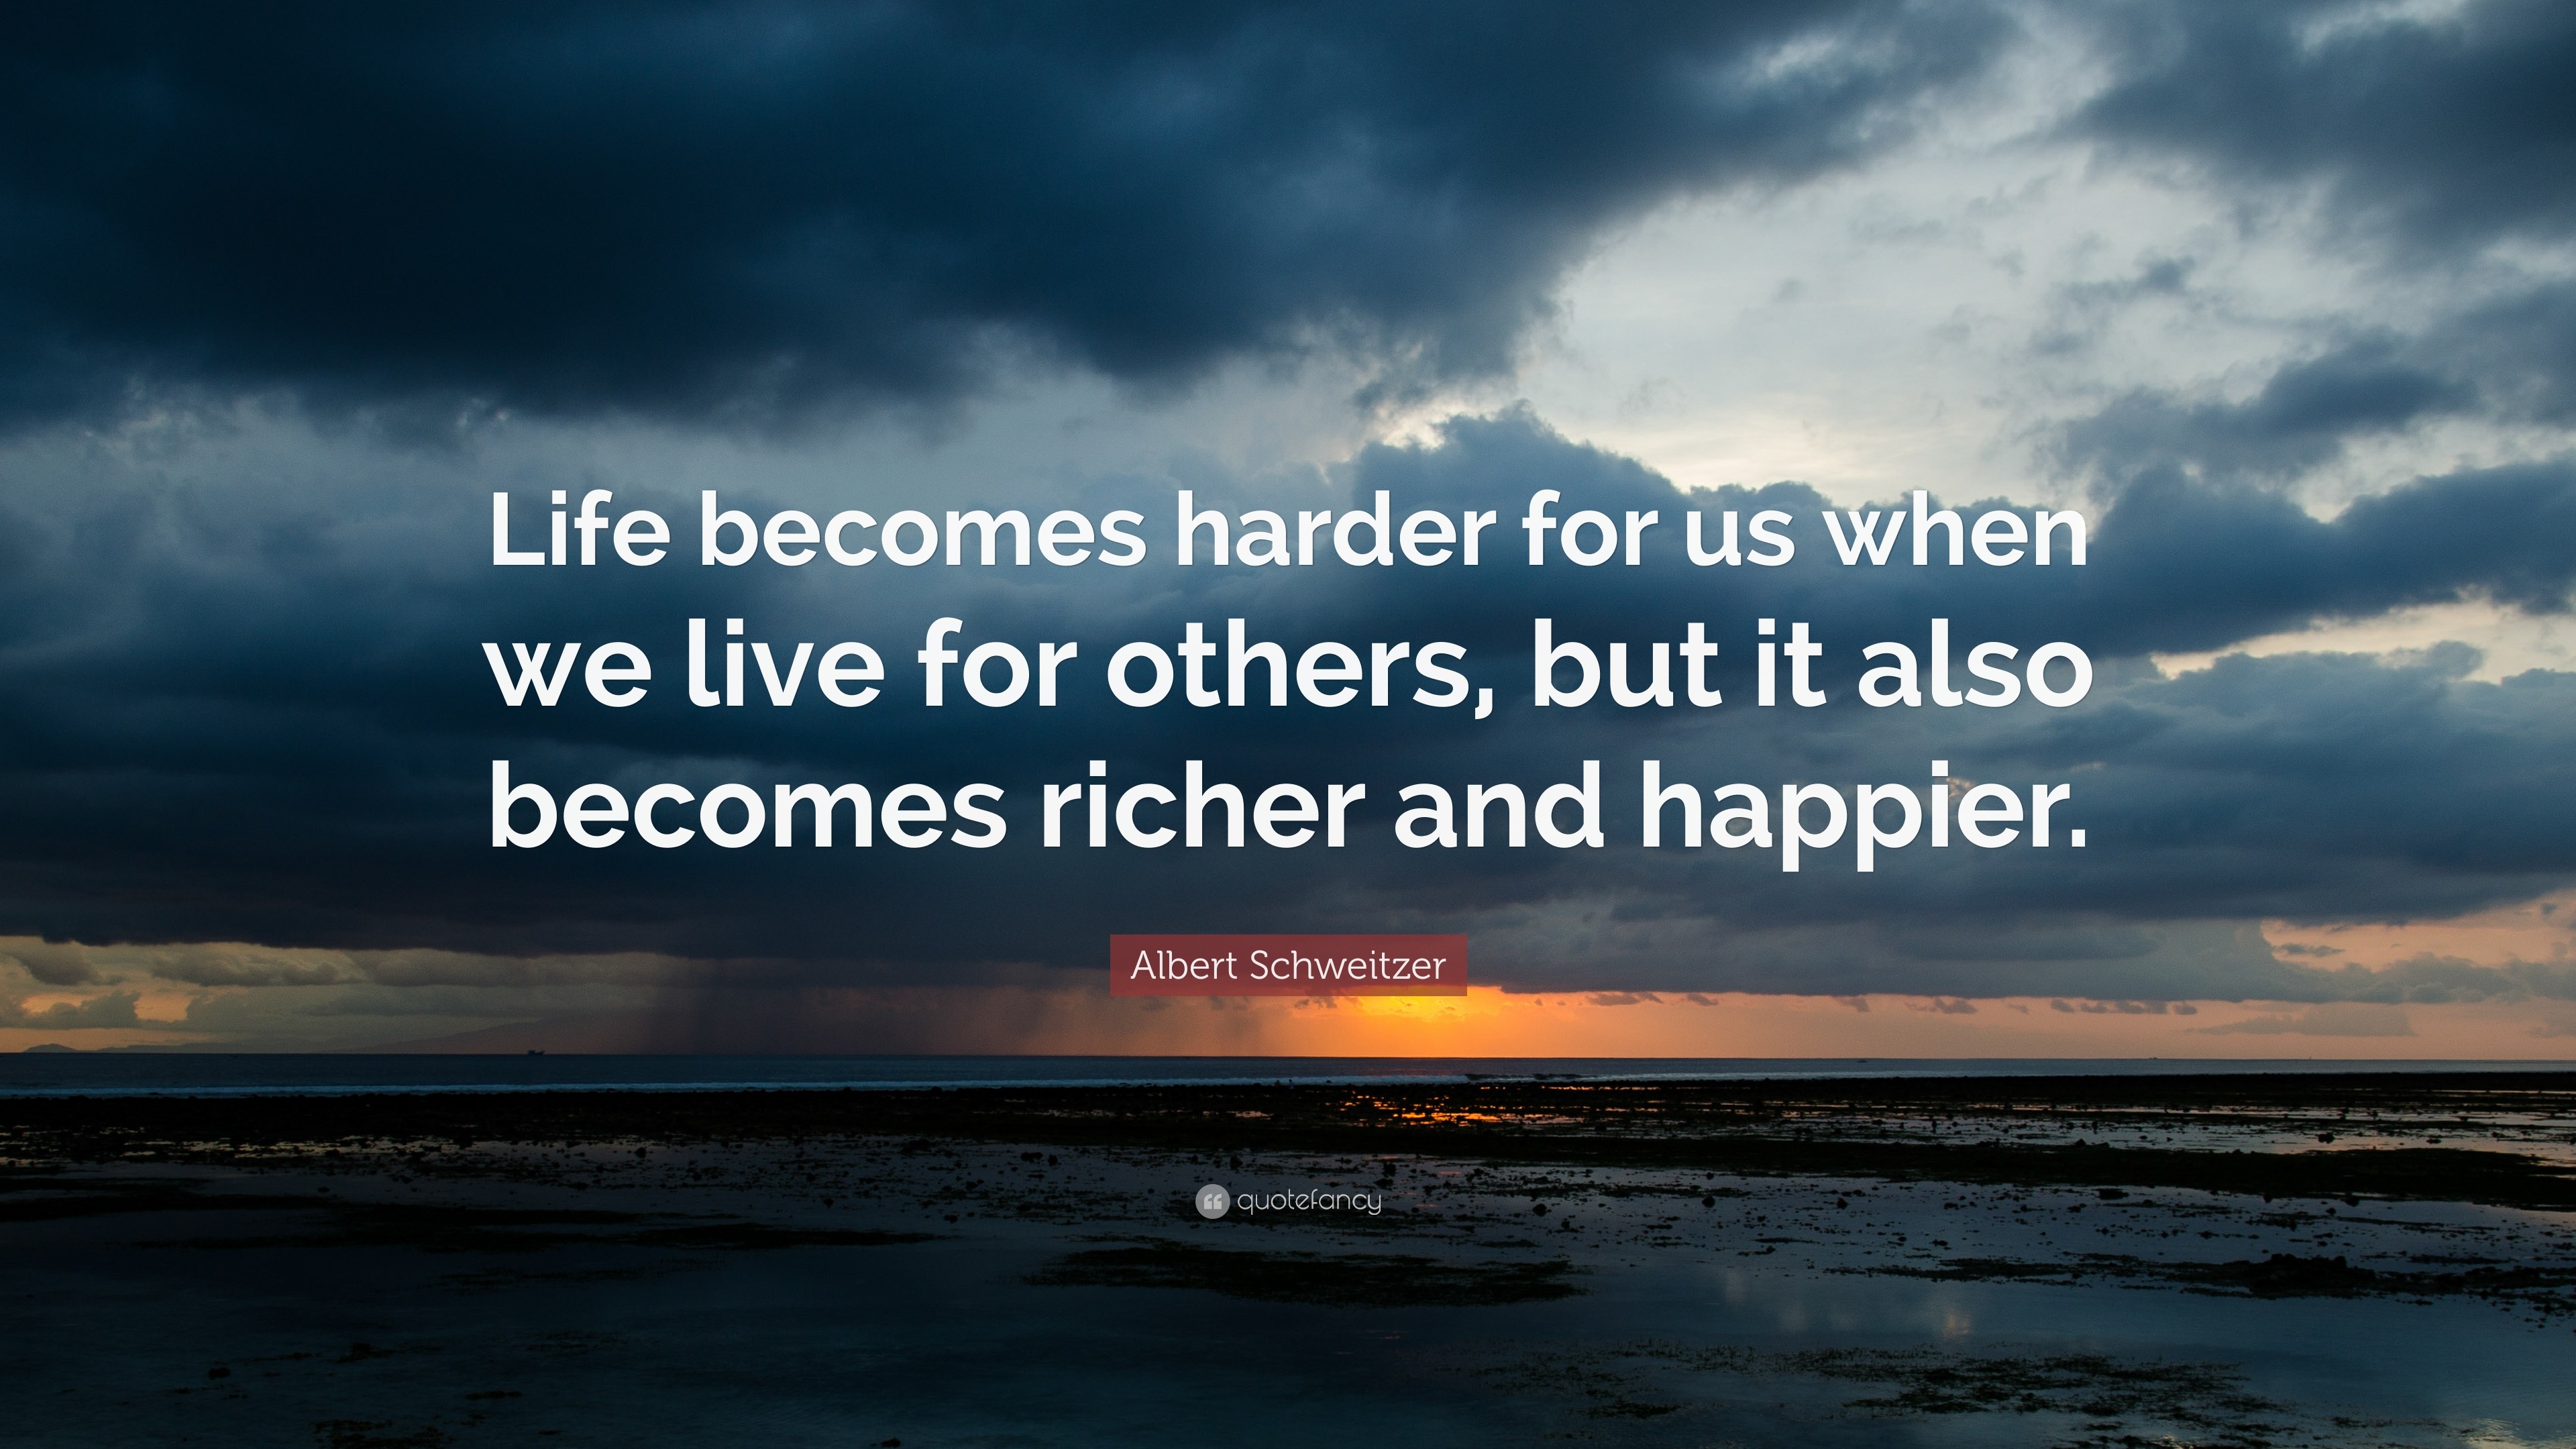 Albert Schweitzer Quote “Life be es harder for us when we live for others